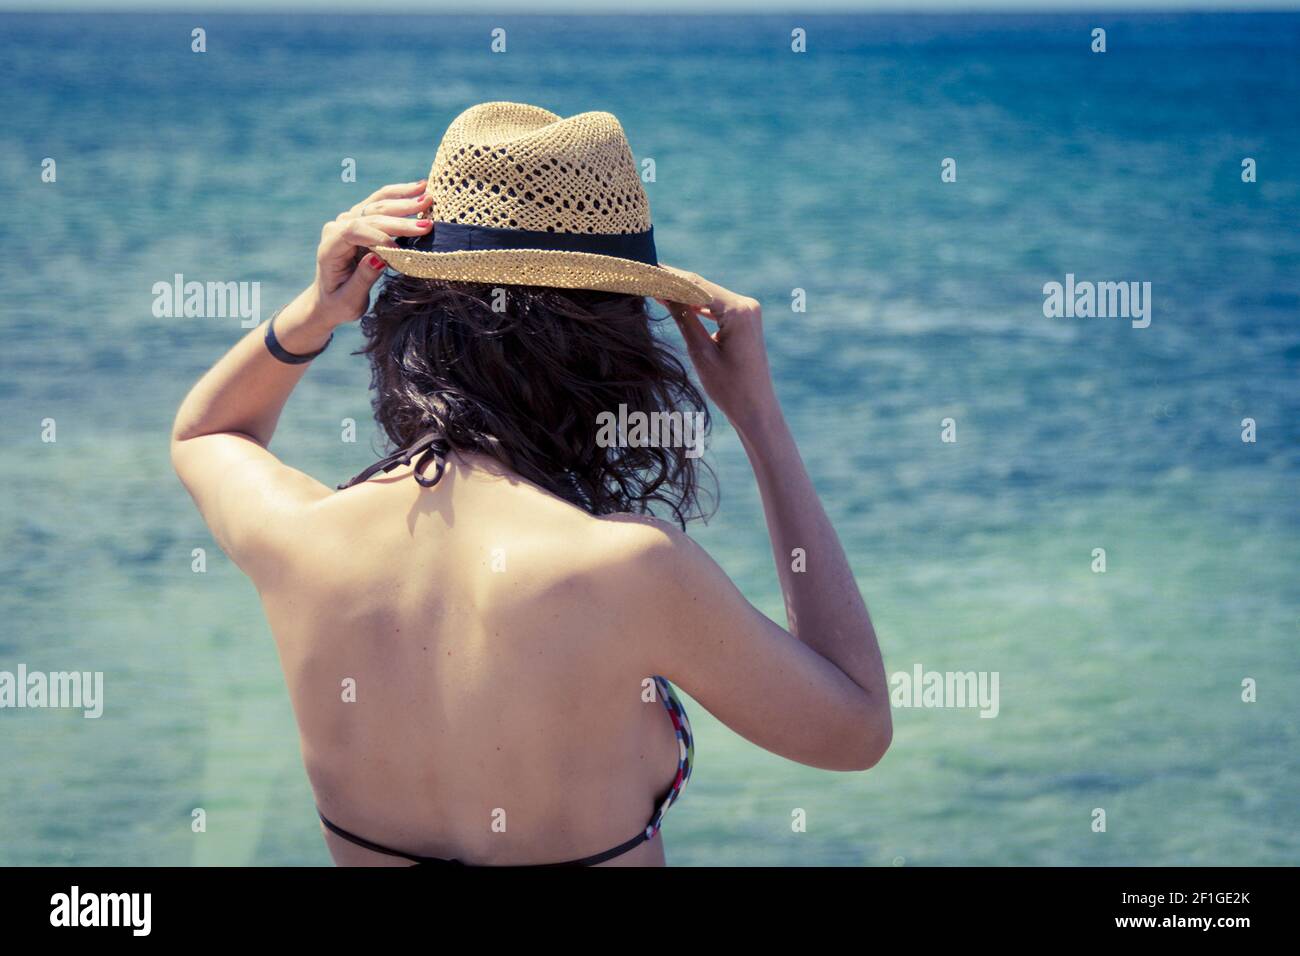 Beautiful woman in sunhat and bikini looking at the beach on a hot summer day. Photo from Fuerteventura Island, Spain Stock Photo